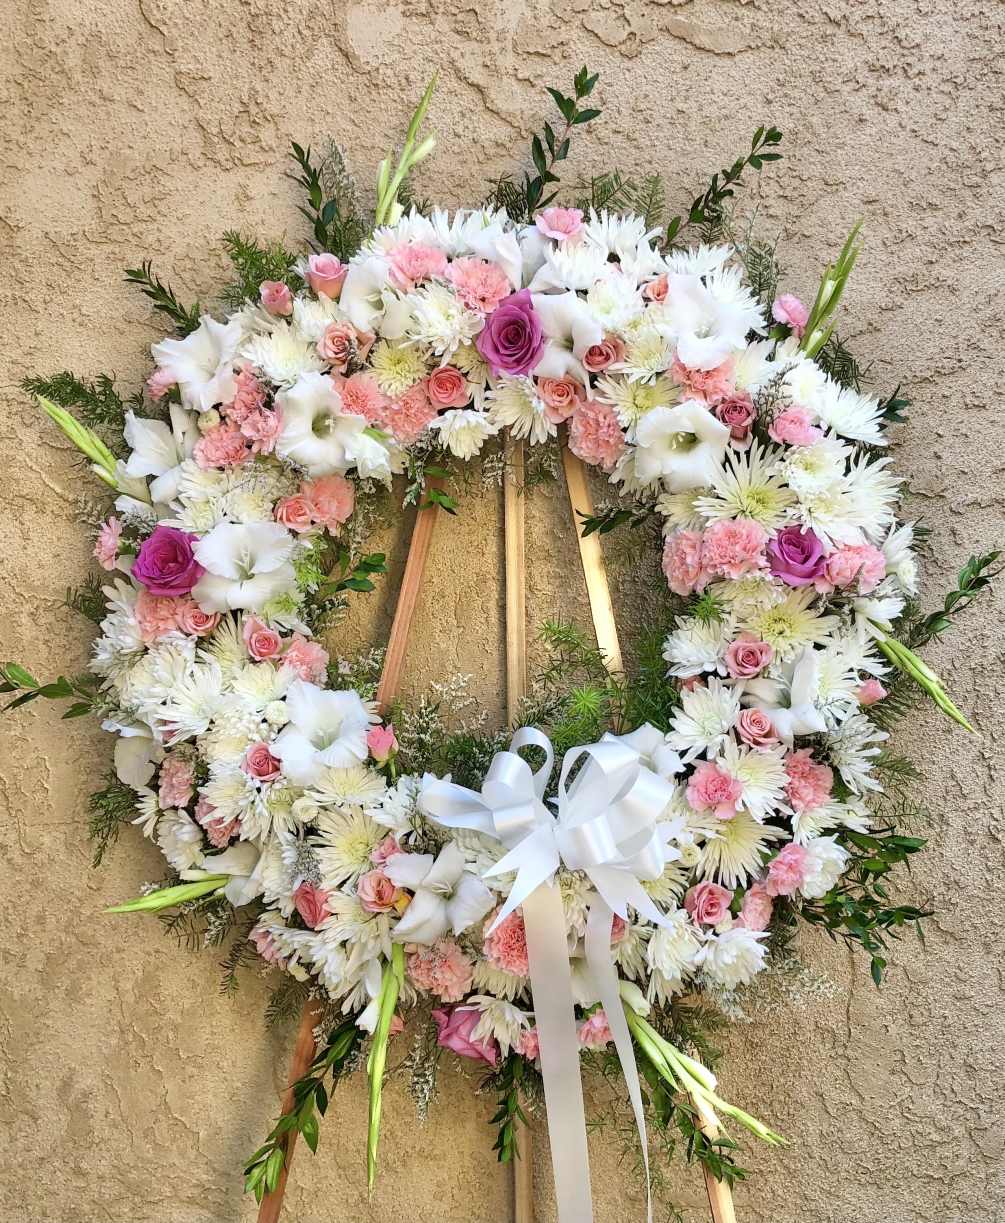 Beautiful standing funeral spray arrangement with mixed pink and white flowers with